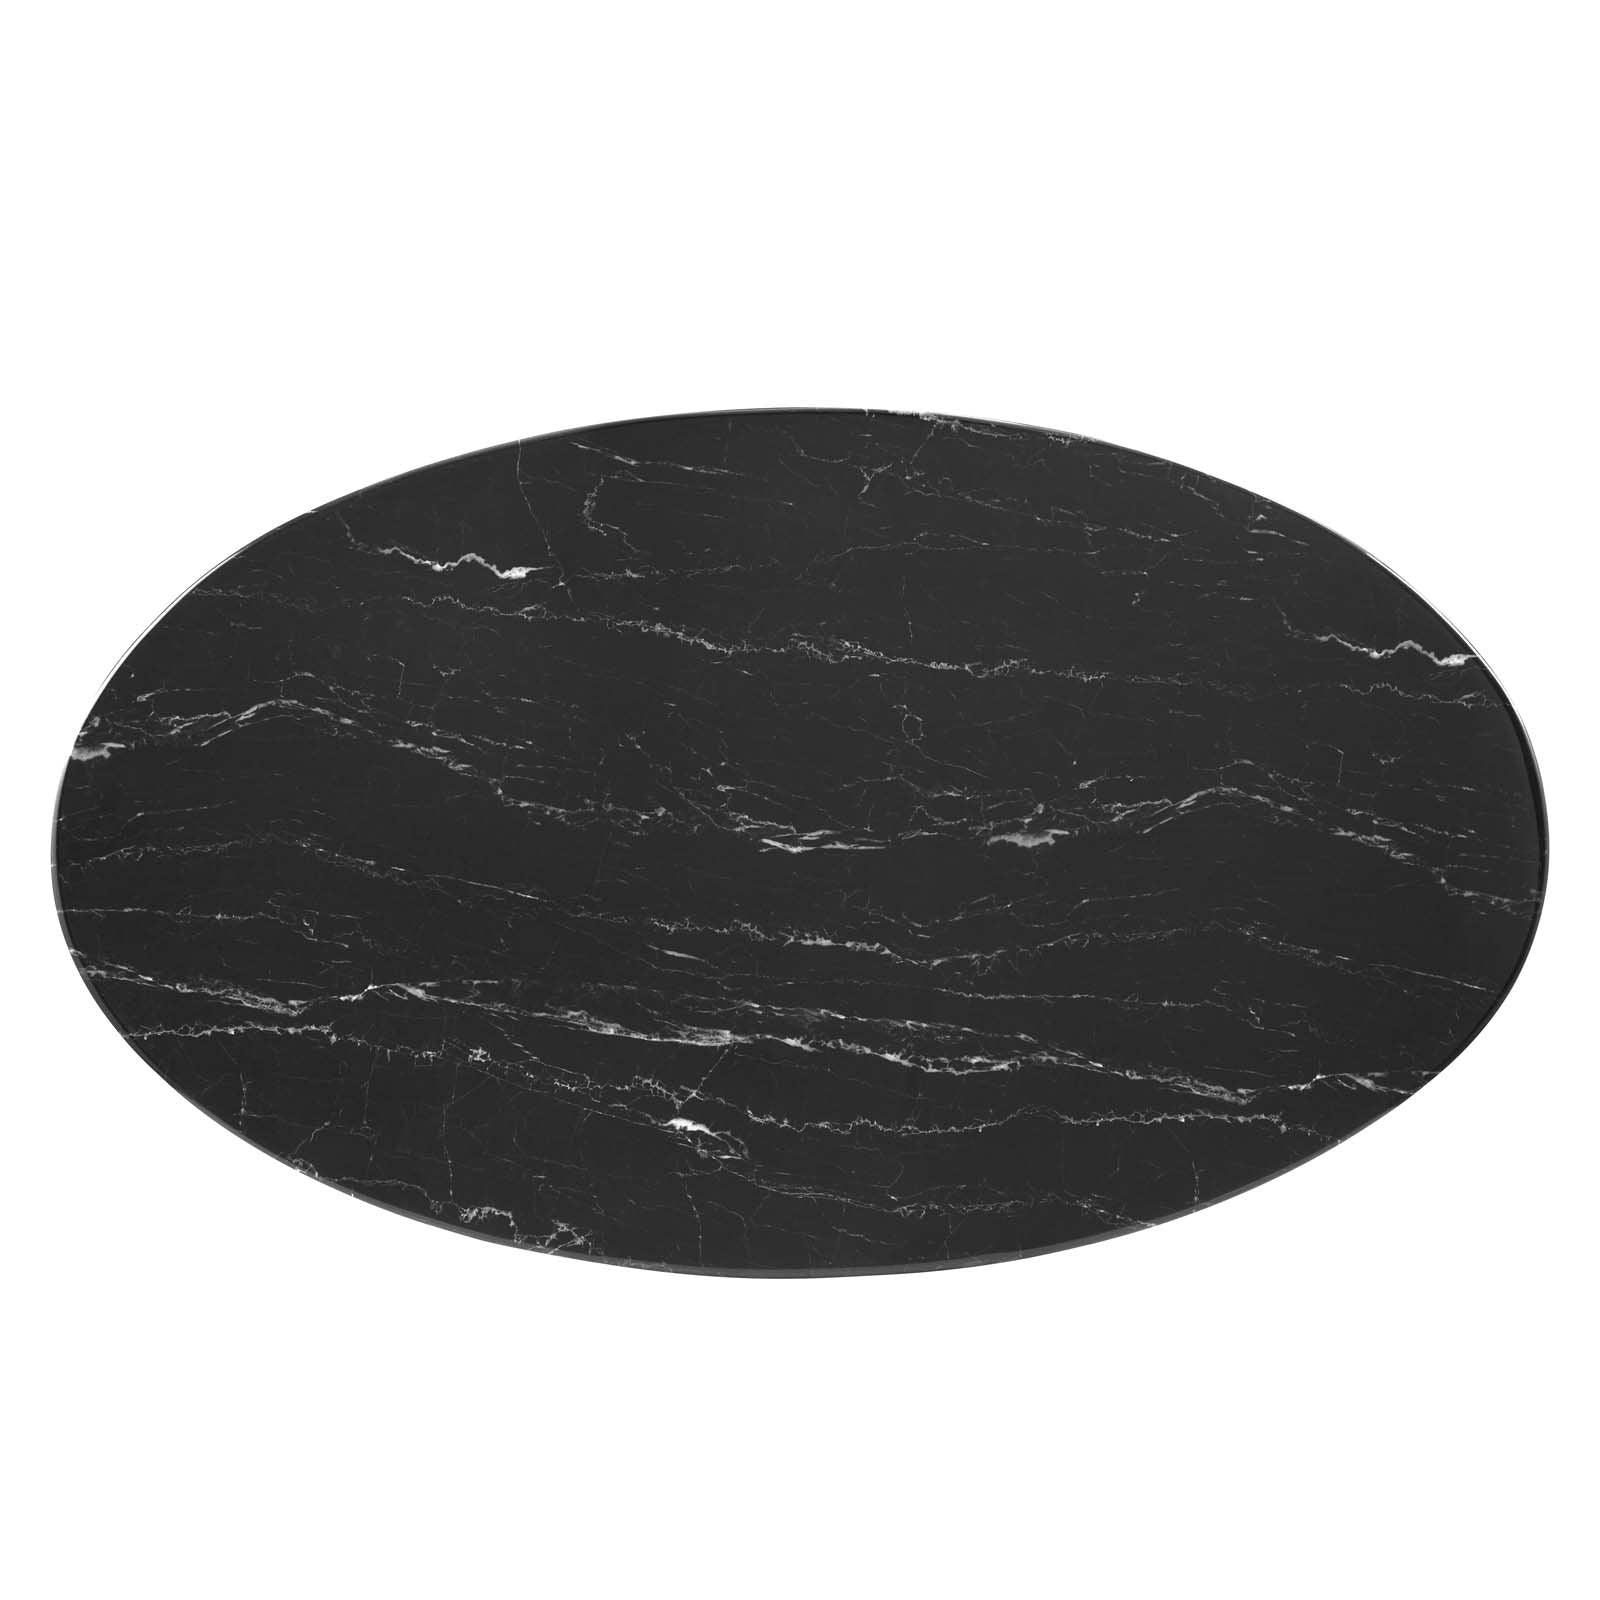 Lippa 48"  Oval Artificial Marble Dining Table - East Shore Modern Home Furnishings